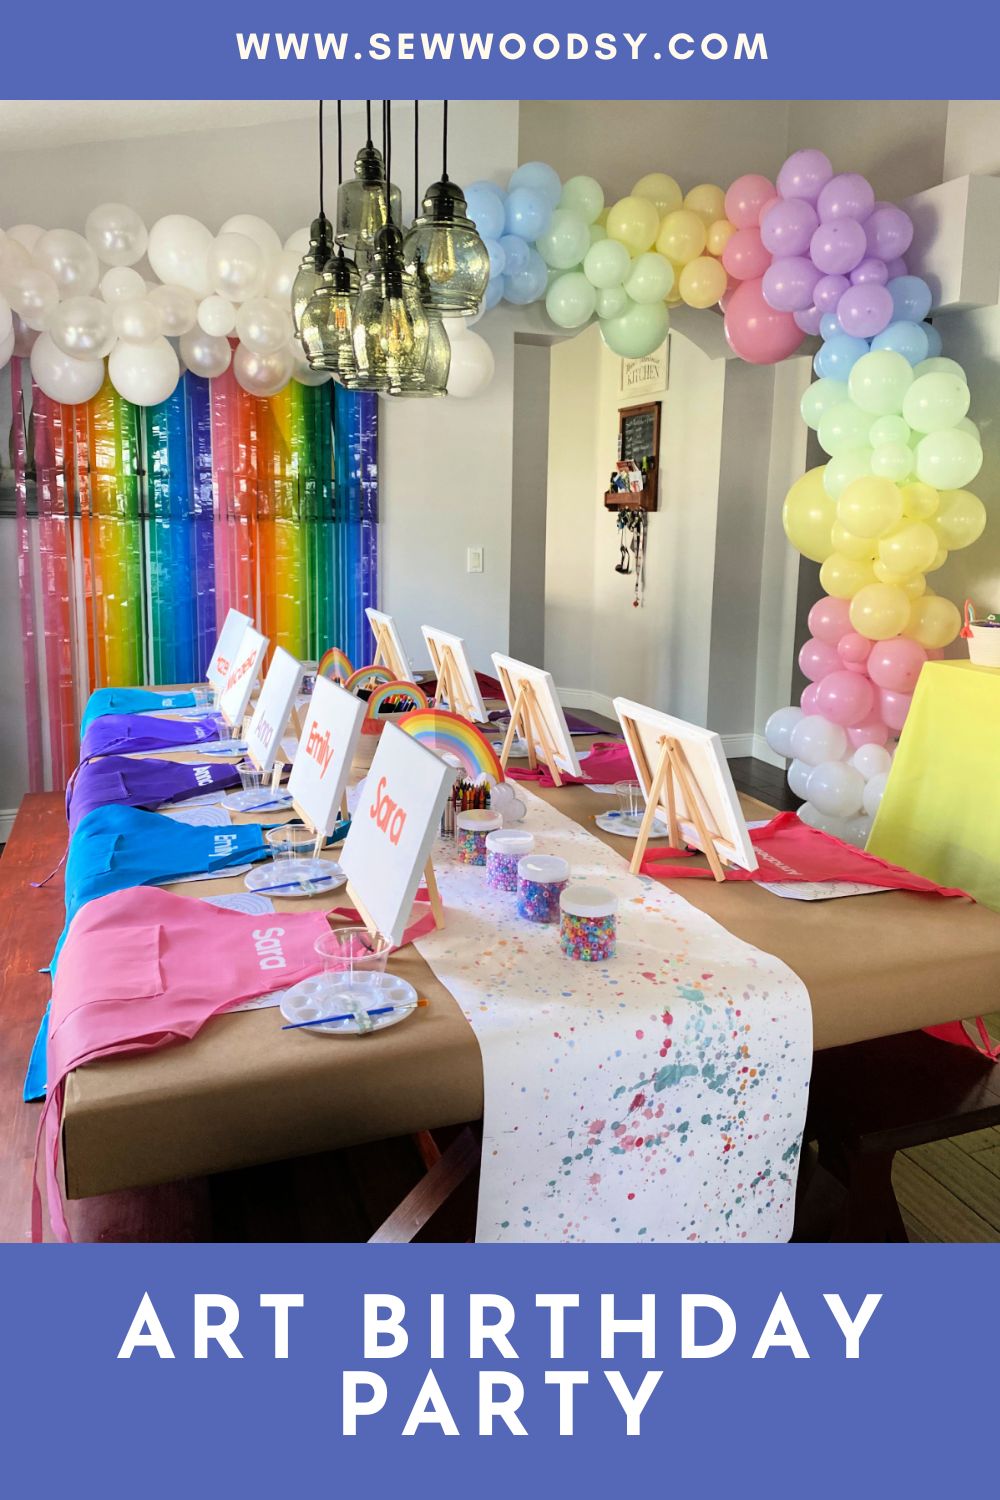 Table with aprons, canvas and a rainbow balloon arch in the background.